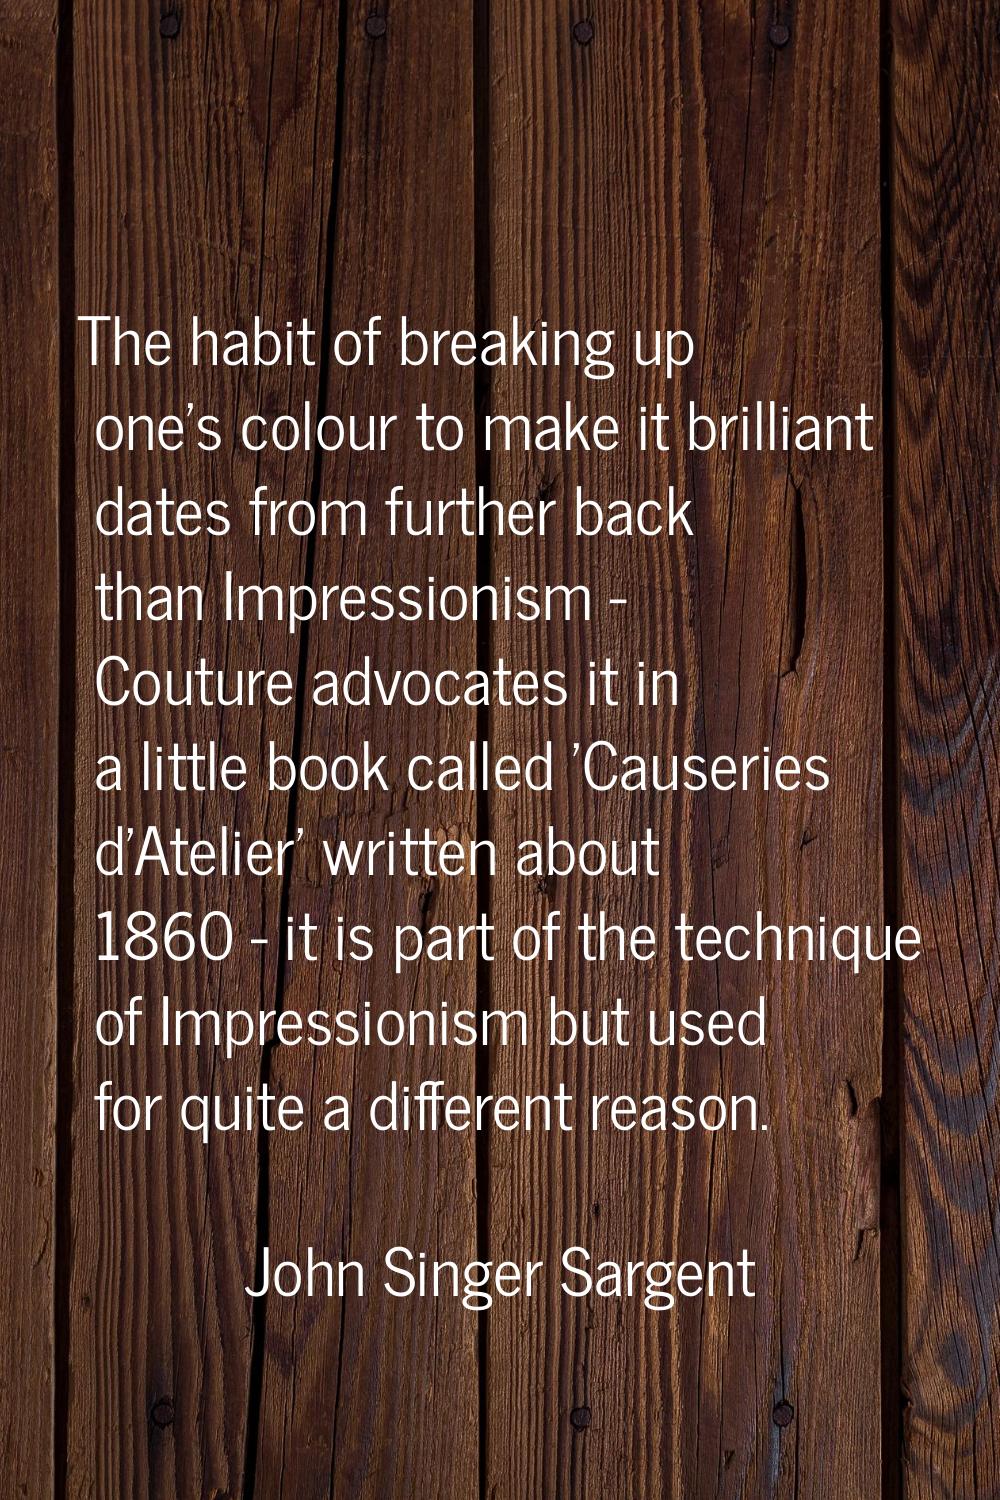 The habit of breaking up one's colour to make it brilliant dates from further back than Impressioni